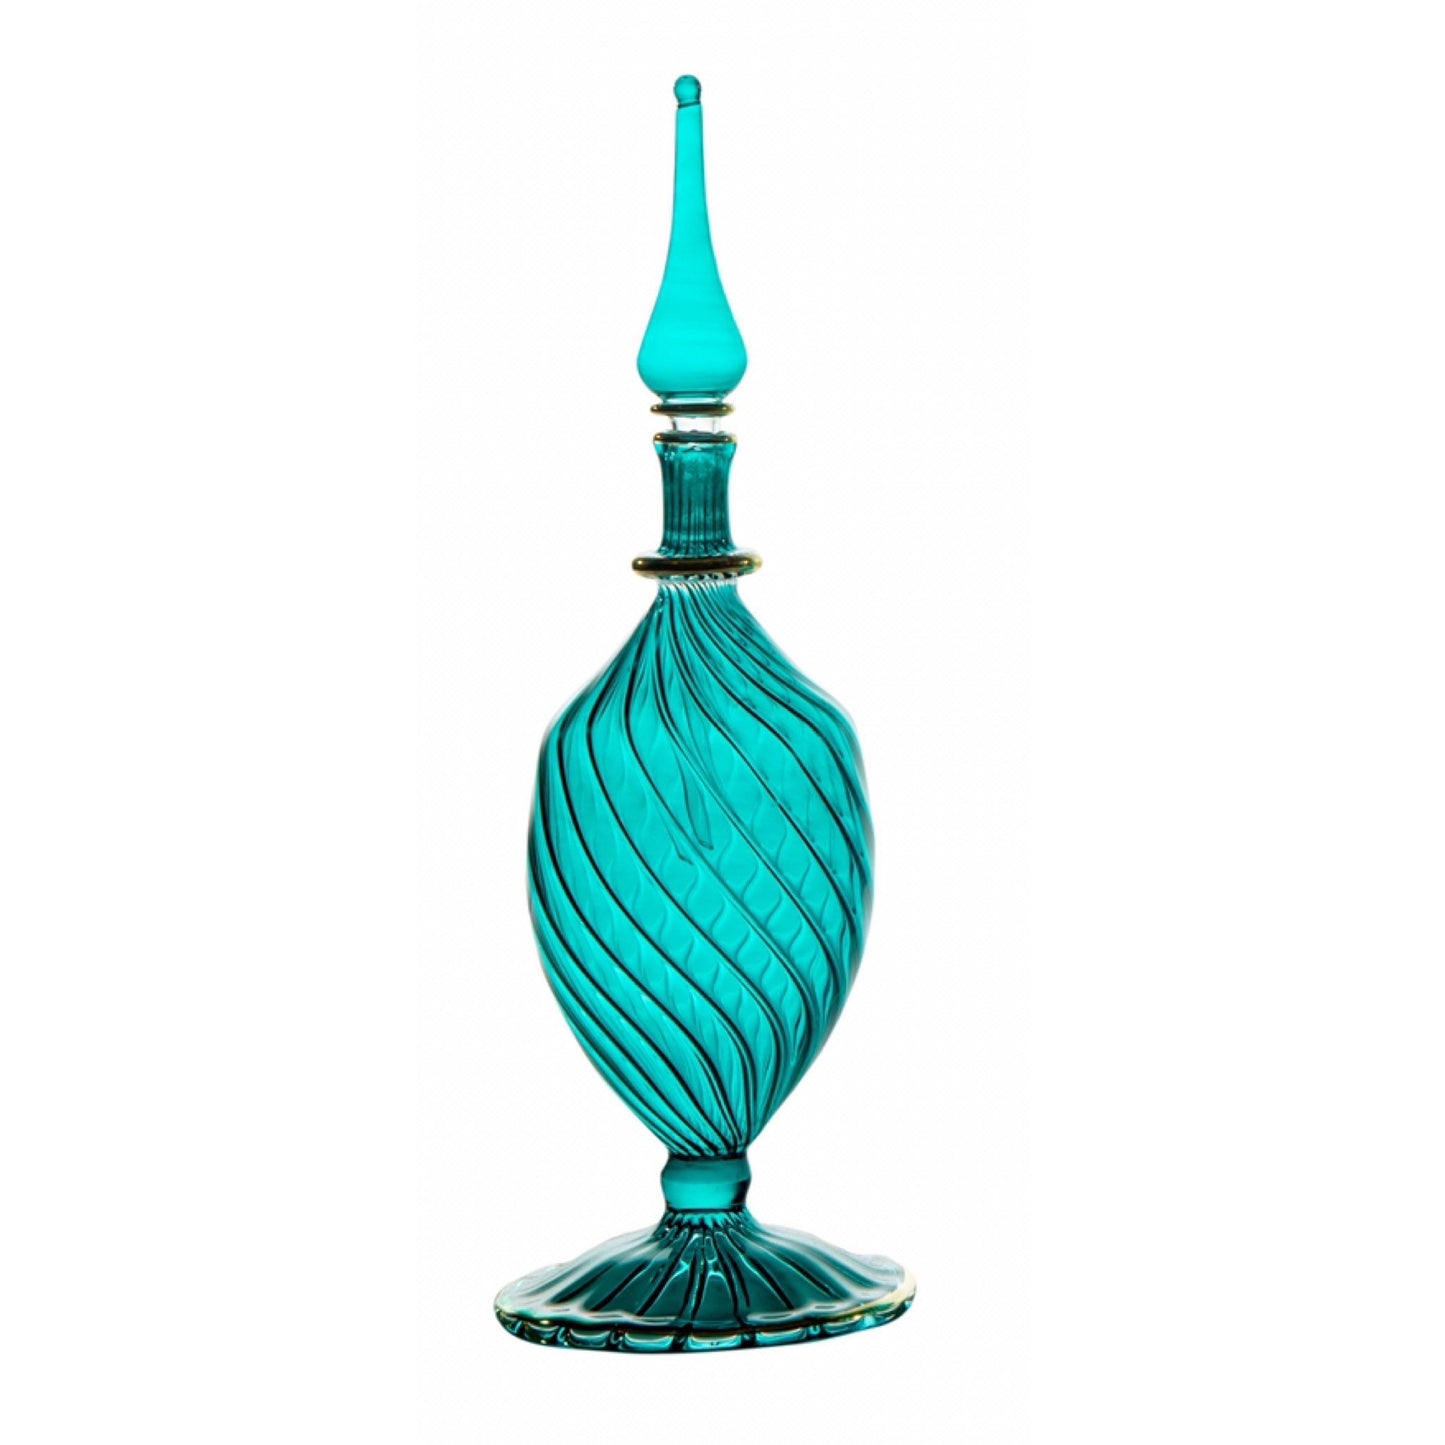 Glass art perfume bottle - Essential oil bottle - Decorative bottle - fragrance decant - Ribbed turquoise glass - hand painted - Blown Glass